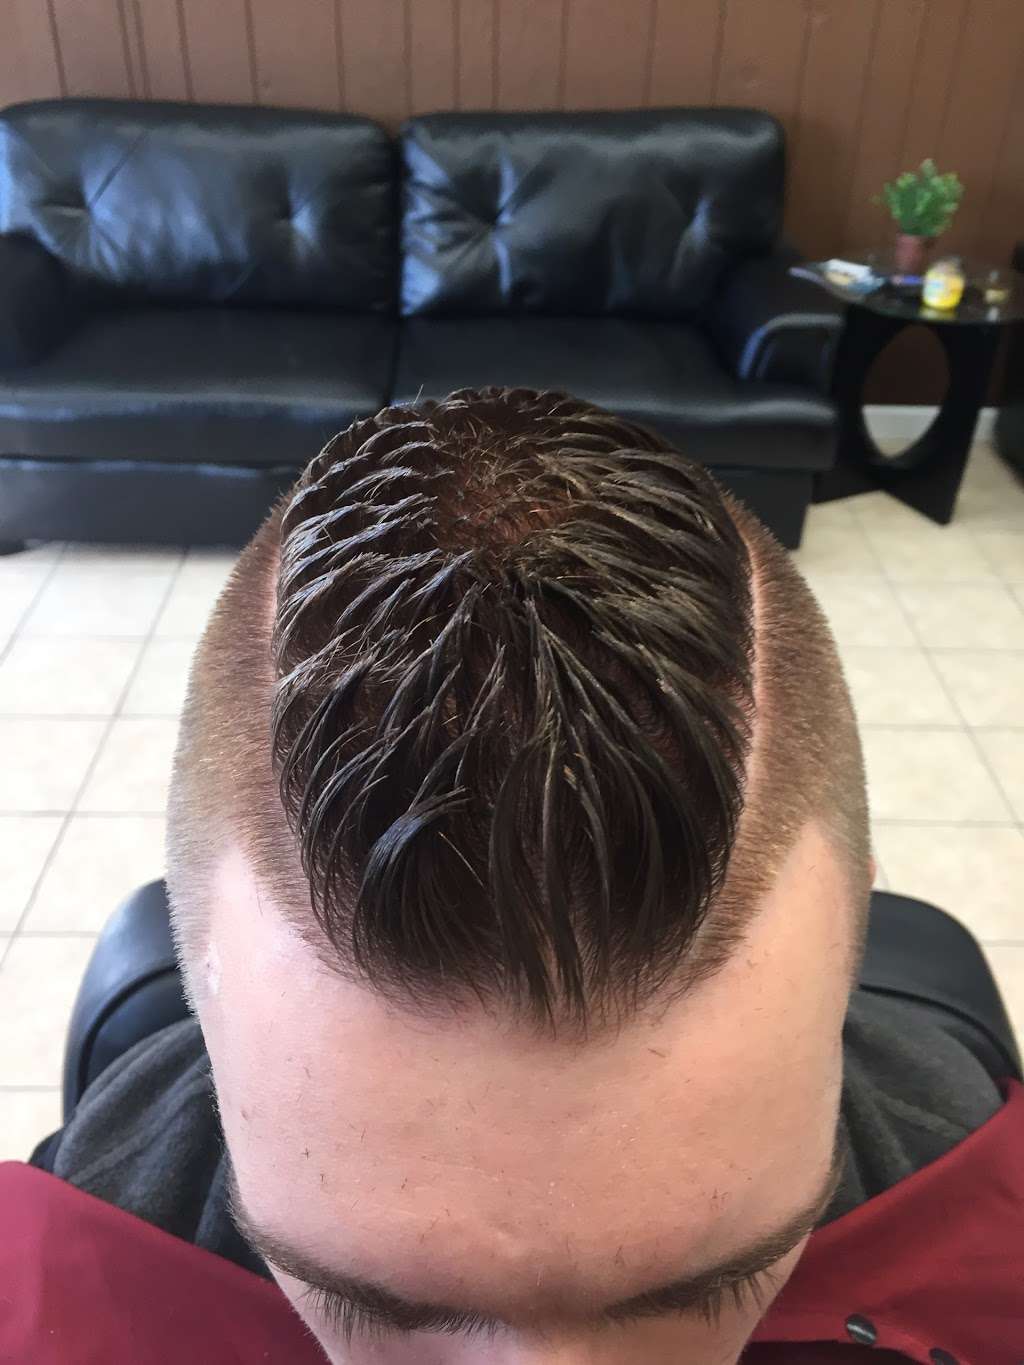 Royal Cuts | 15919 76th Ave, Tinley Park, IL 60477 | Phone: (708) 429-0550